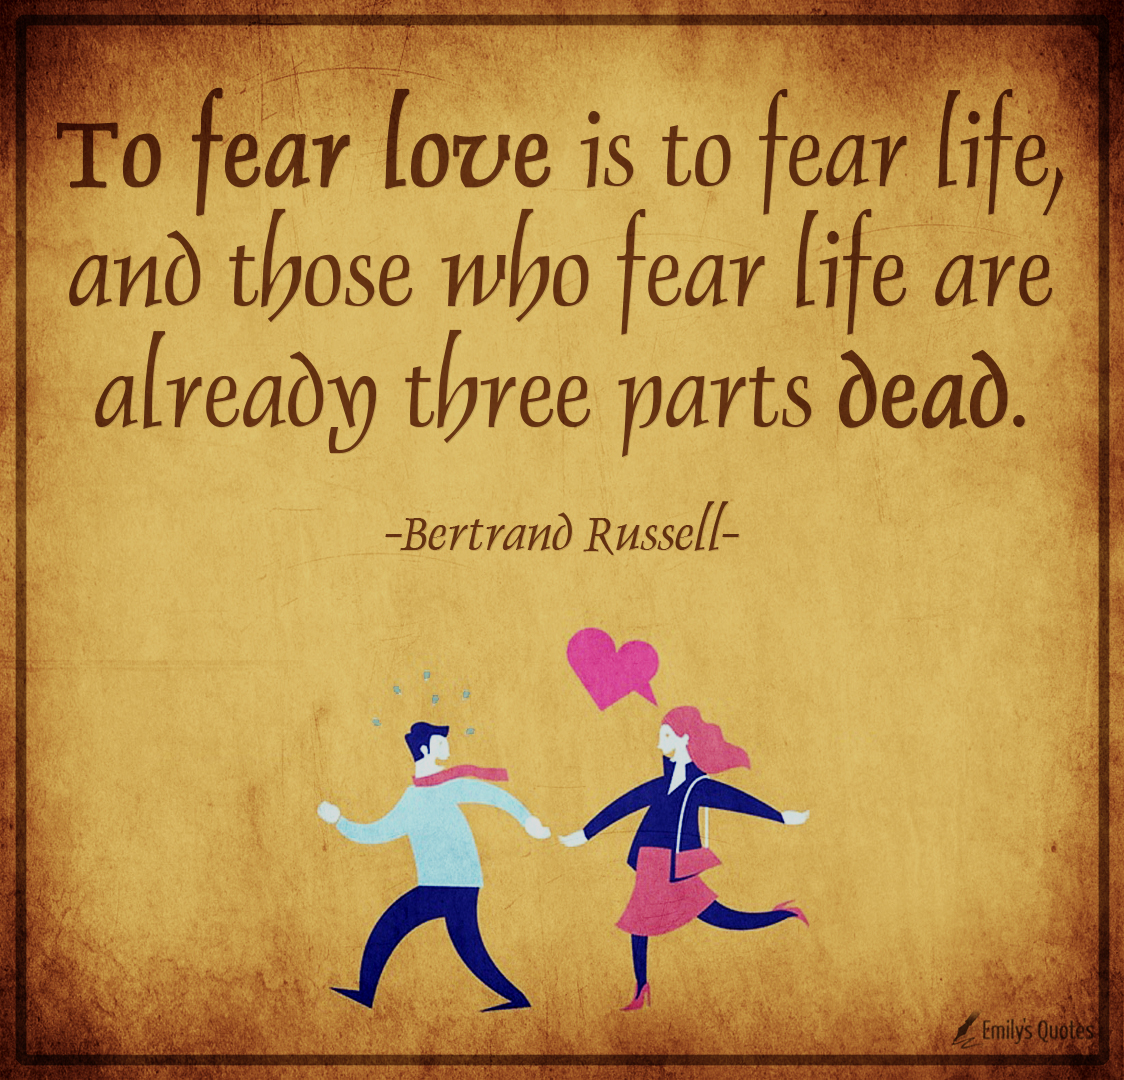 To fear love is to fear life, and those who fear life are already three